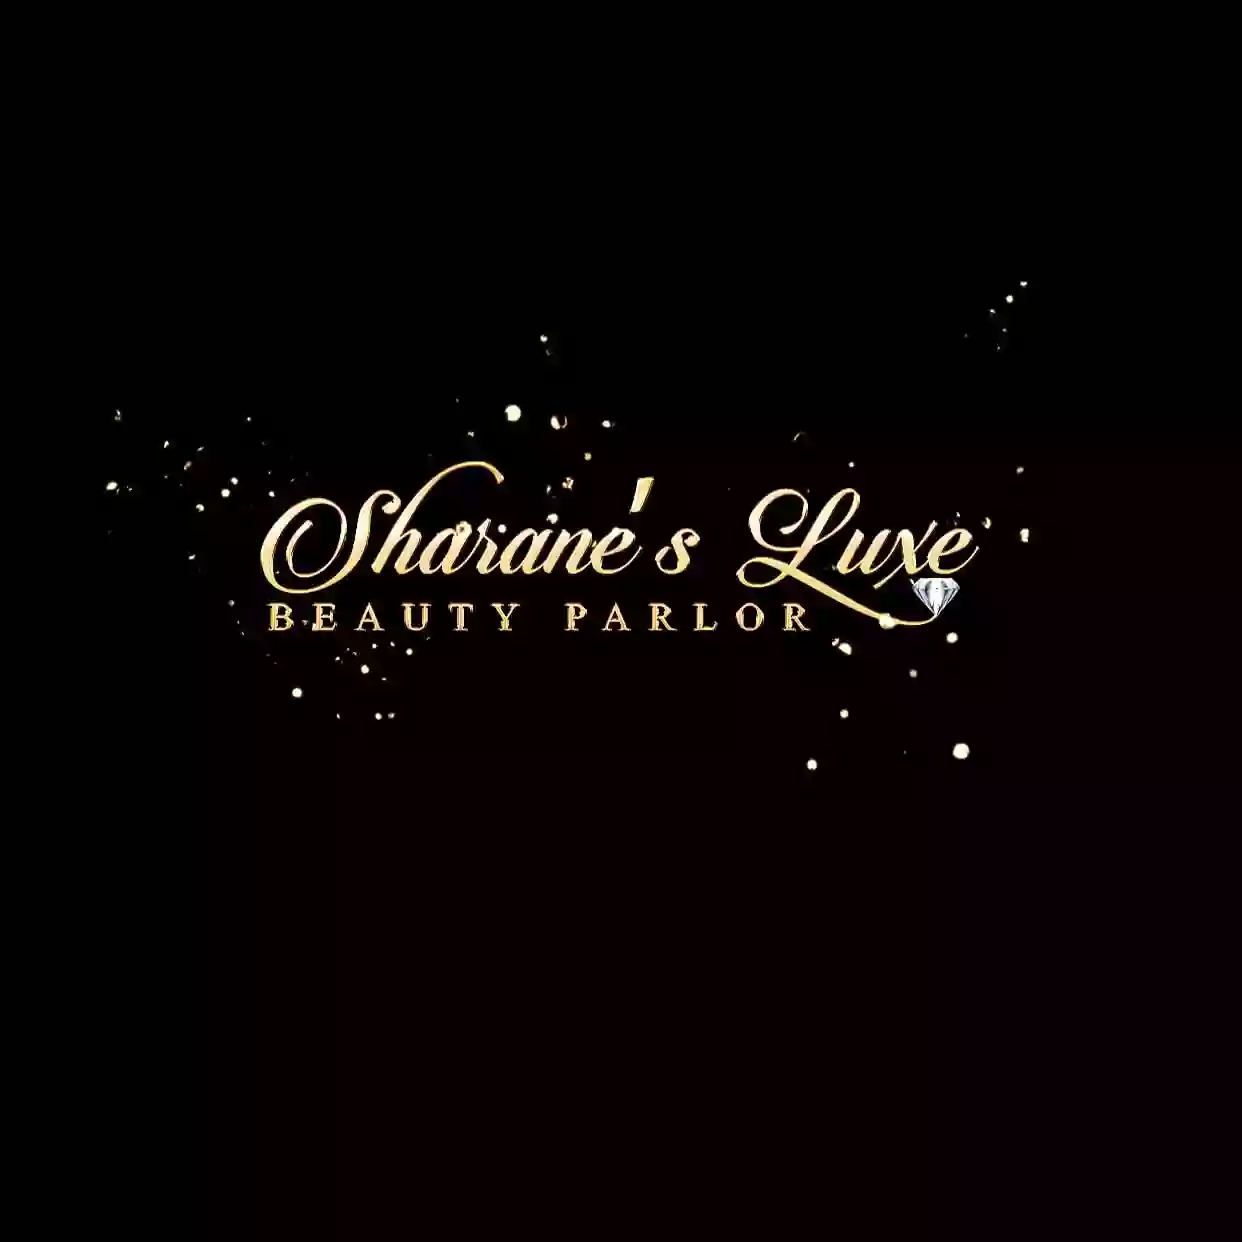 Sharane’s Luxe Beauty Parlor